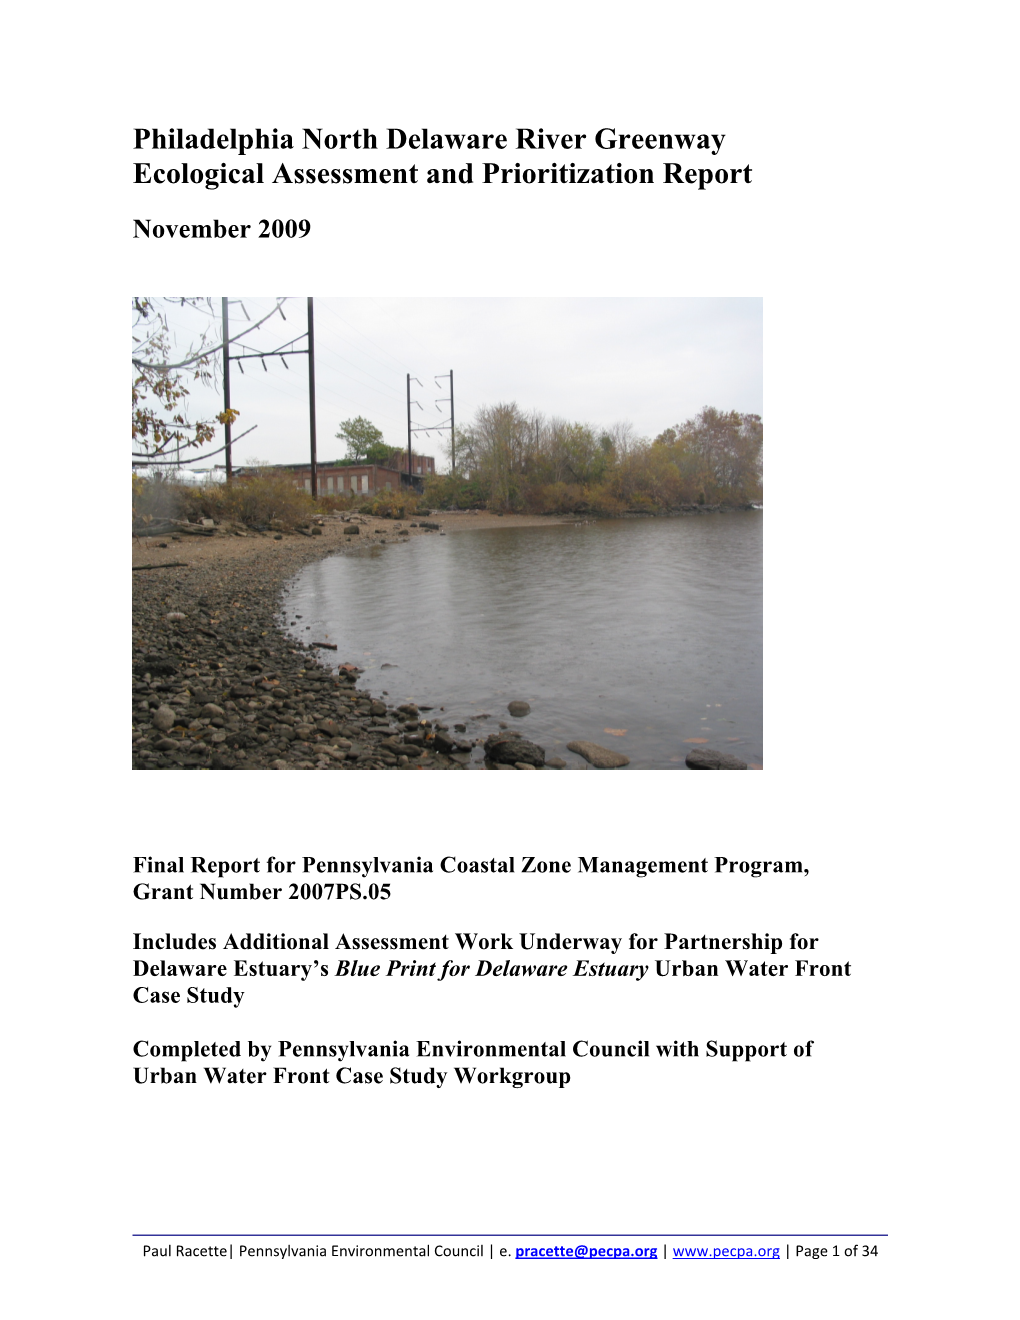 Philadelphia North Delaware River Greenway Ecological Assessment and Prioritization Report